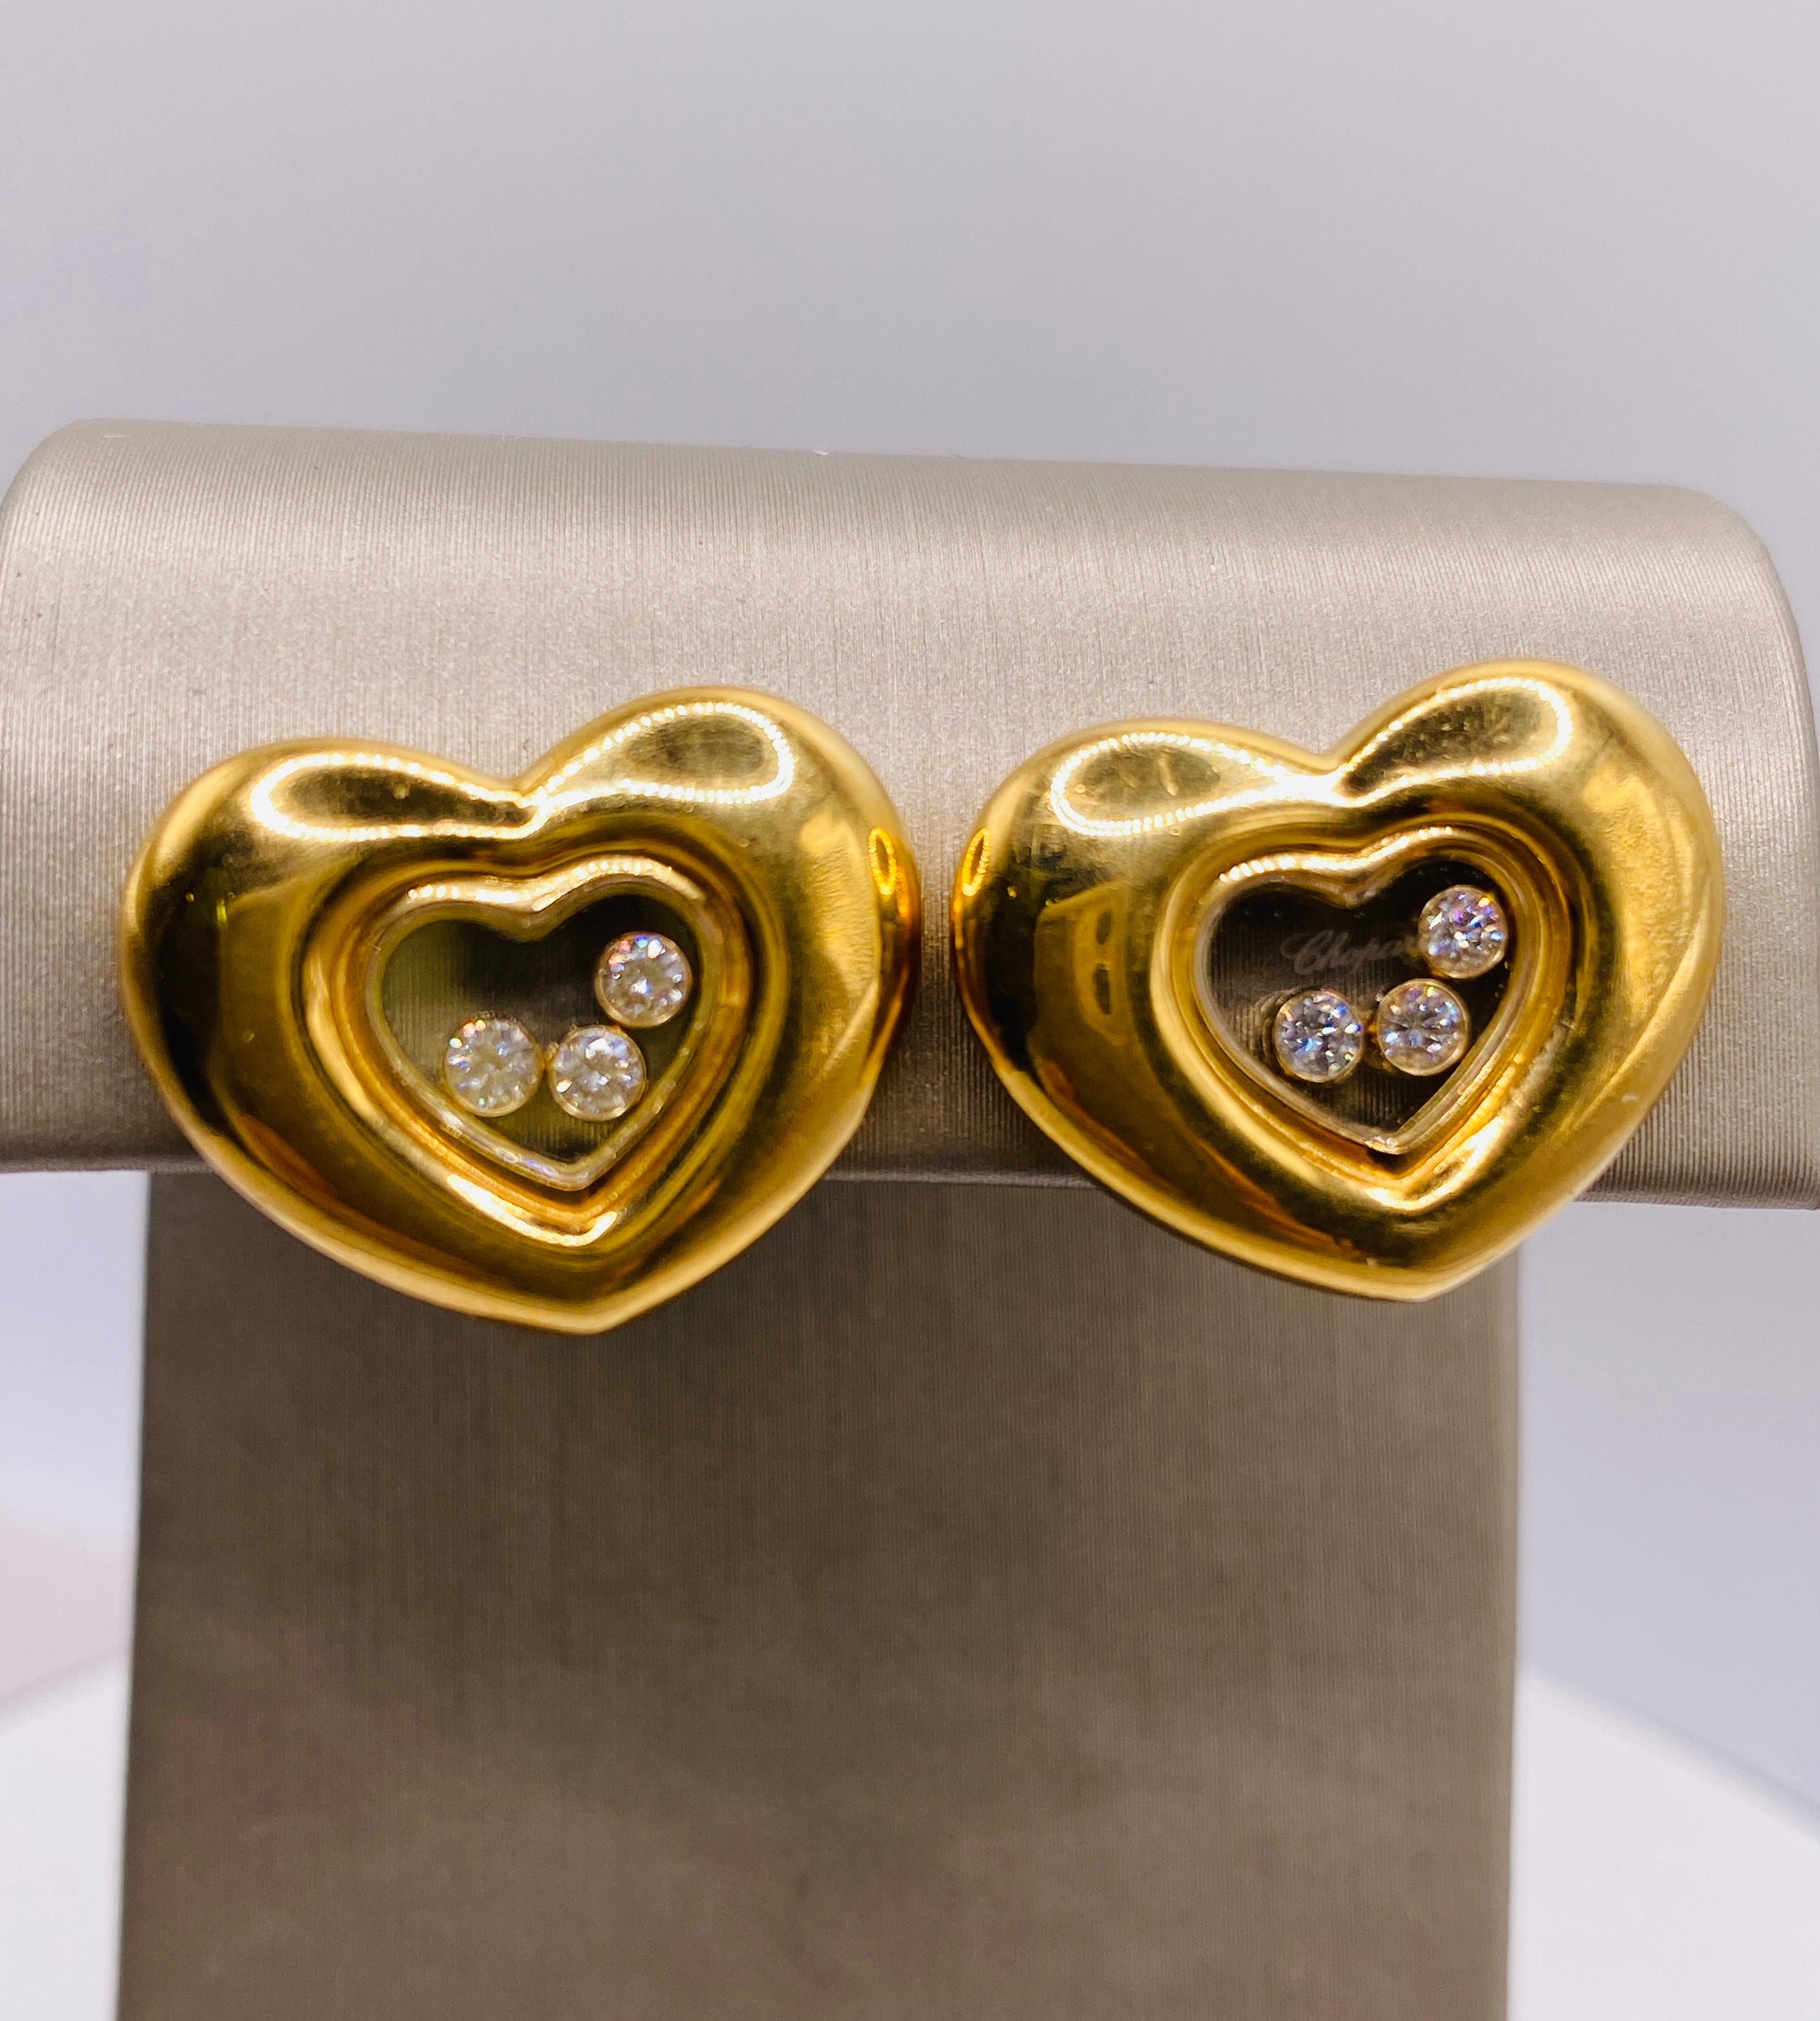  Chopard 18K yellow gold Happy Diamond Heart Clip Earrings with 6= approx. 0.25ctw round brilliant diamonds. Etched Chopard Geneve. Stamped Chopard, Swiss, 750, 84/1742-20 and 9651747. Weight 18.7gm. Each heart measures approximately 20 x 16mm.